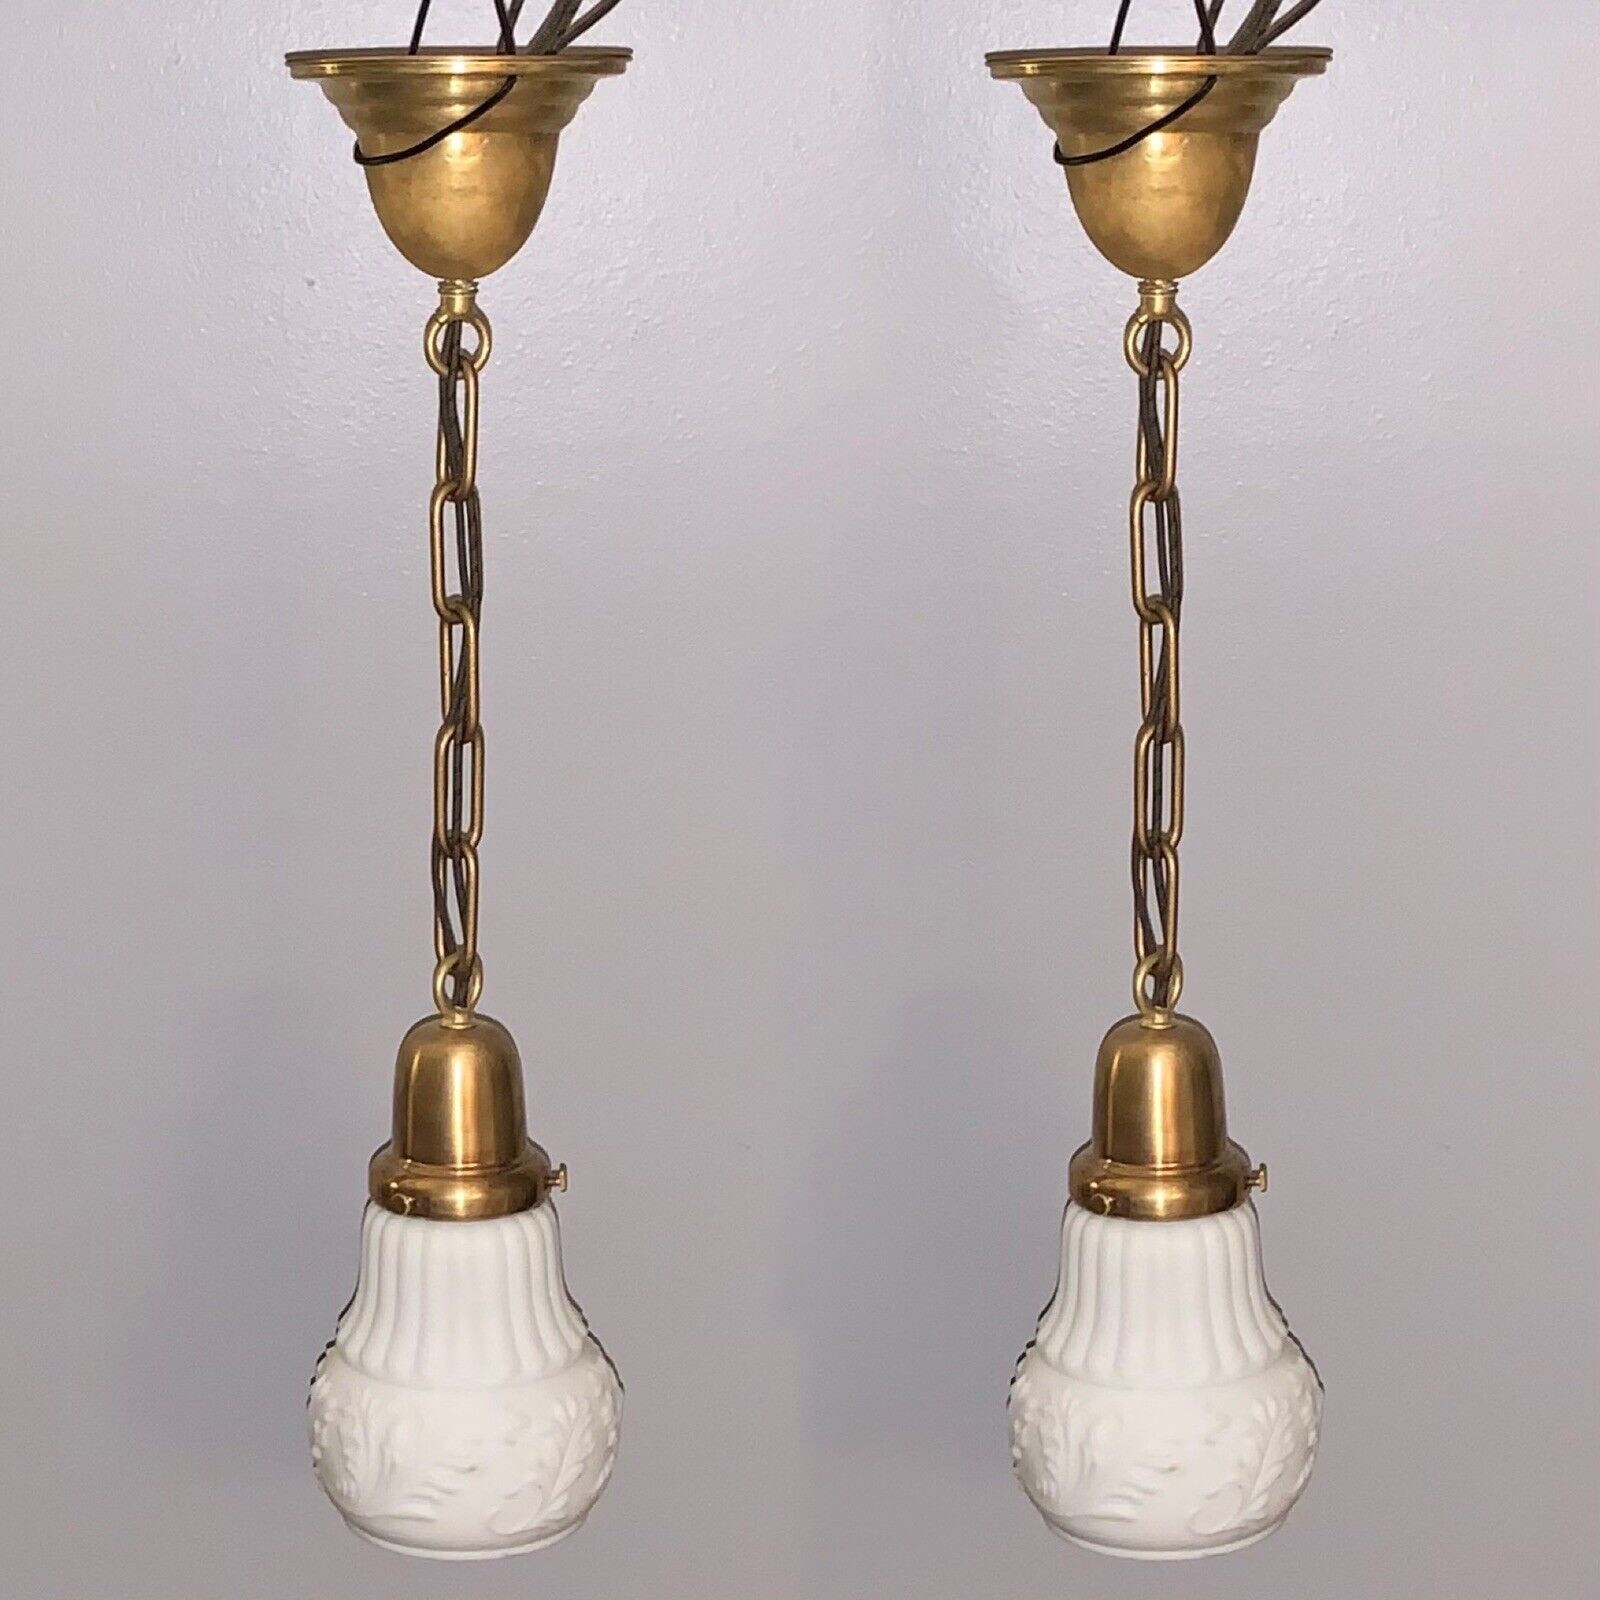 20” Long Vintage Pendant Lights Brass Wired Pair Milk White Globes 119A